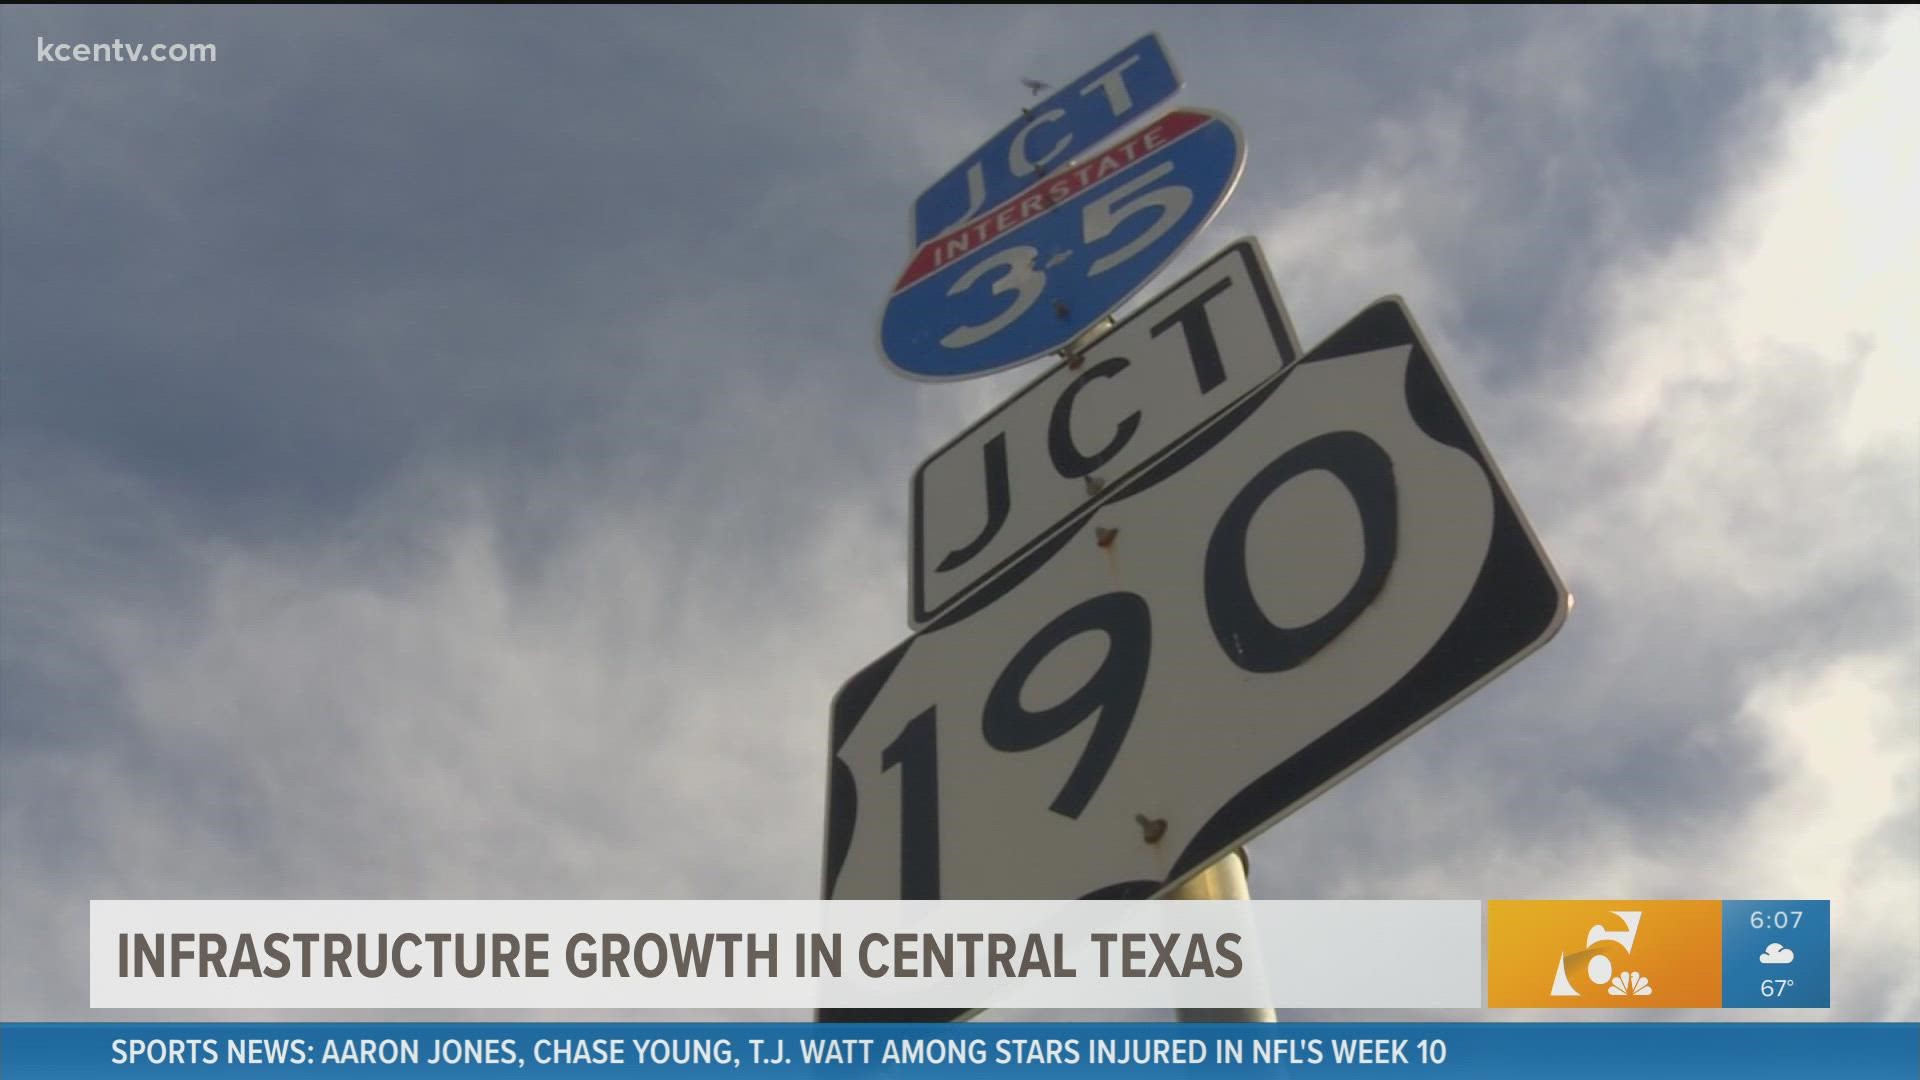 Infrastructure growth in Central Texas